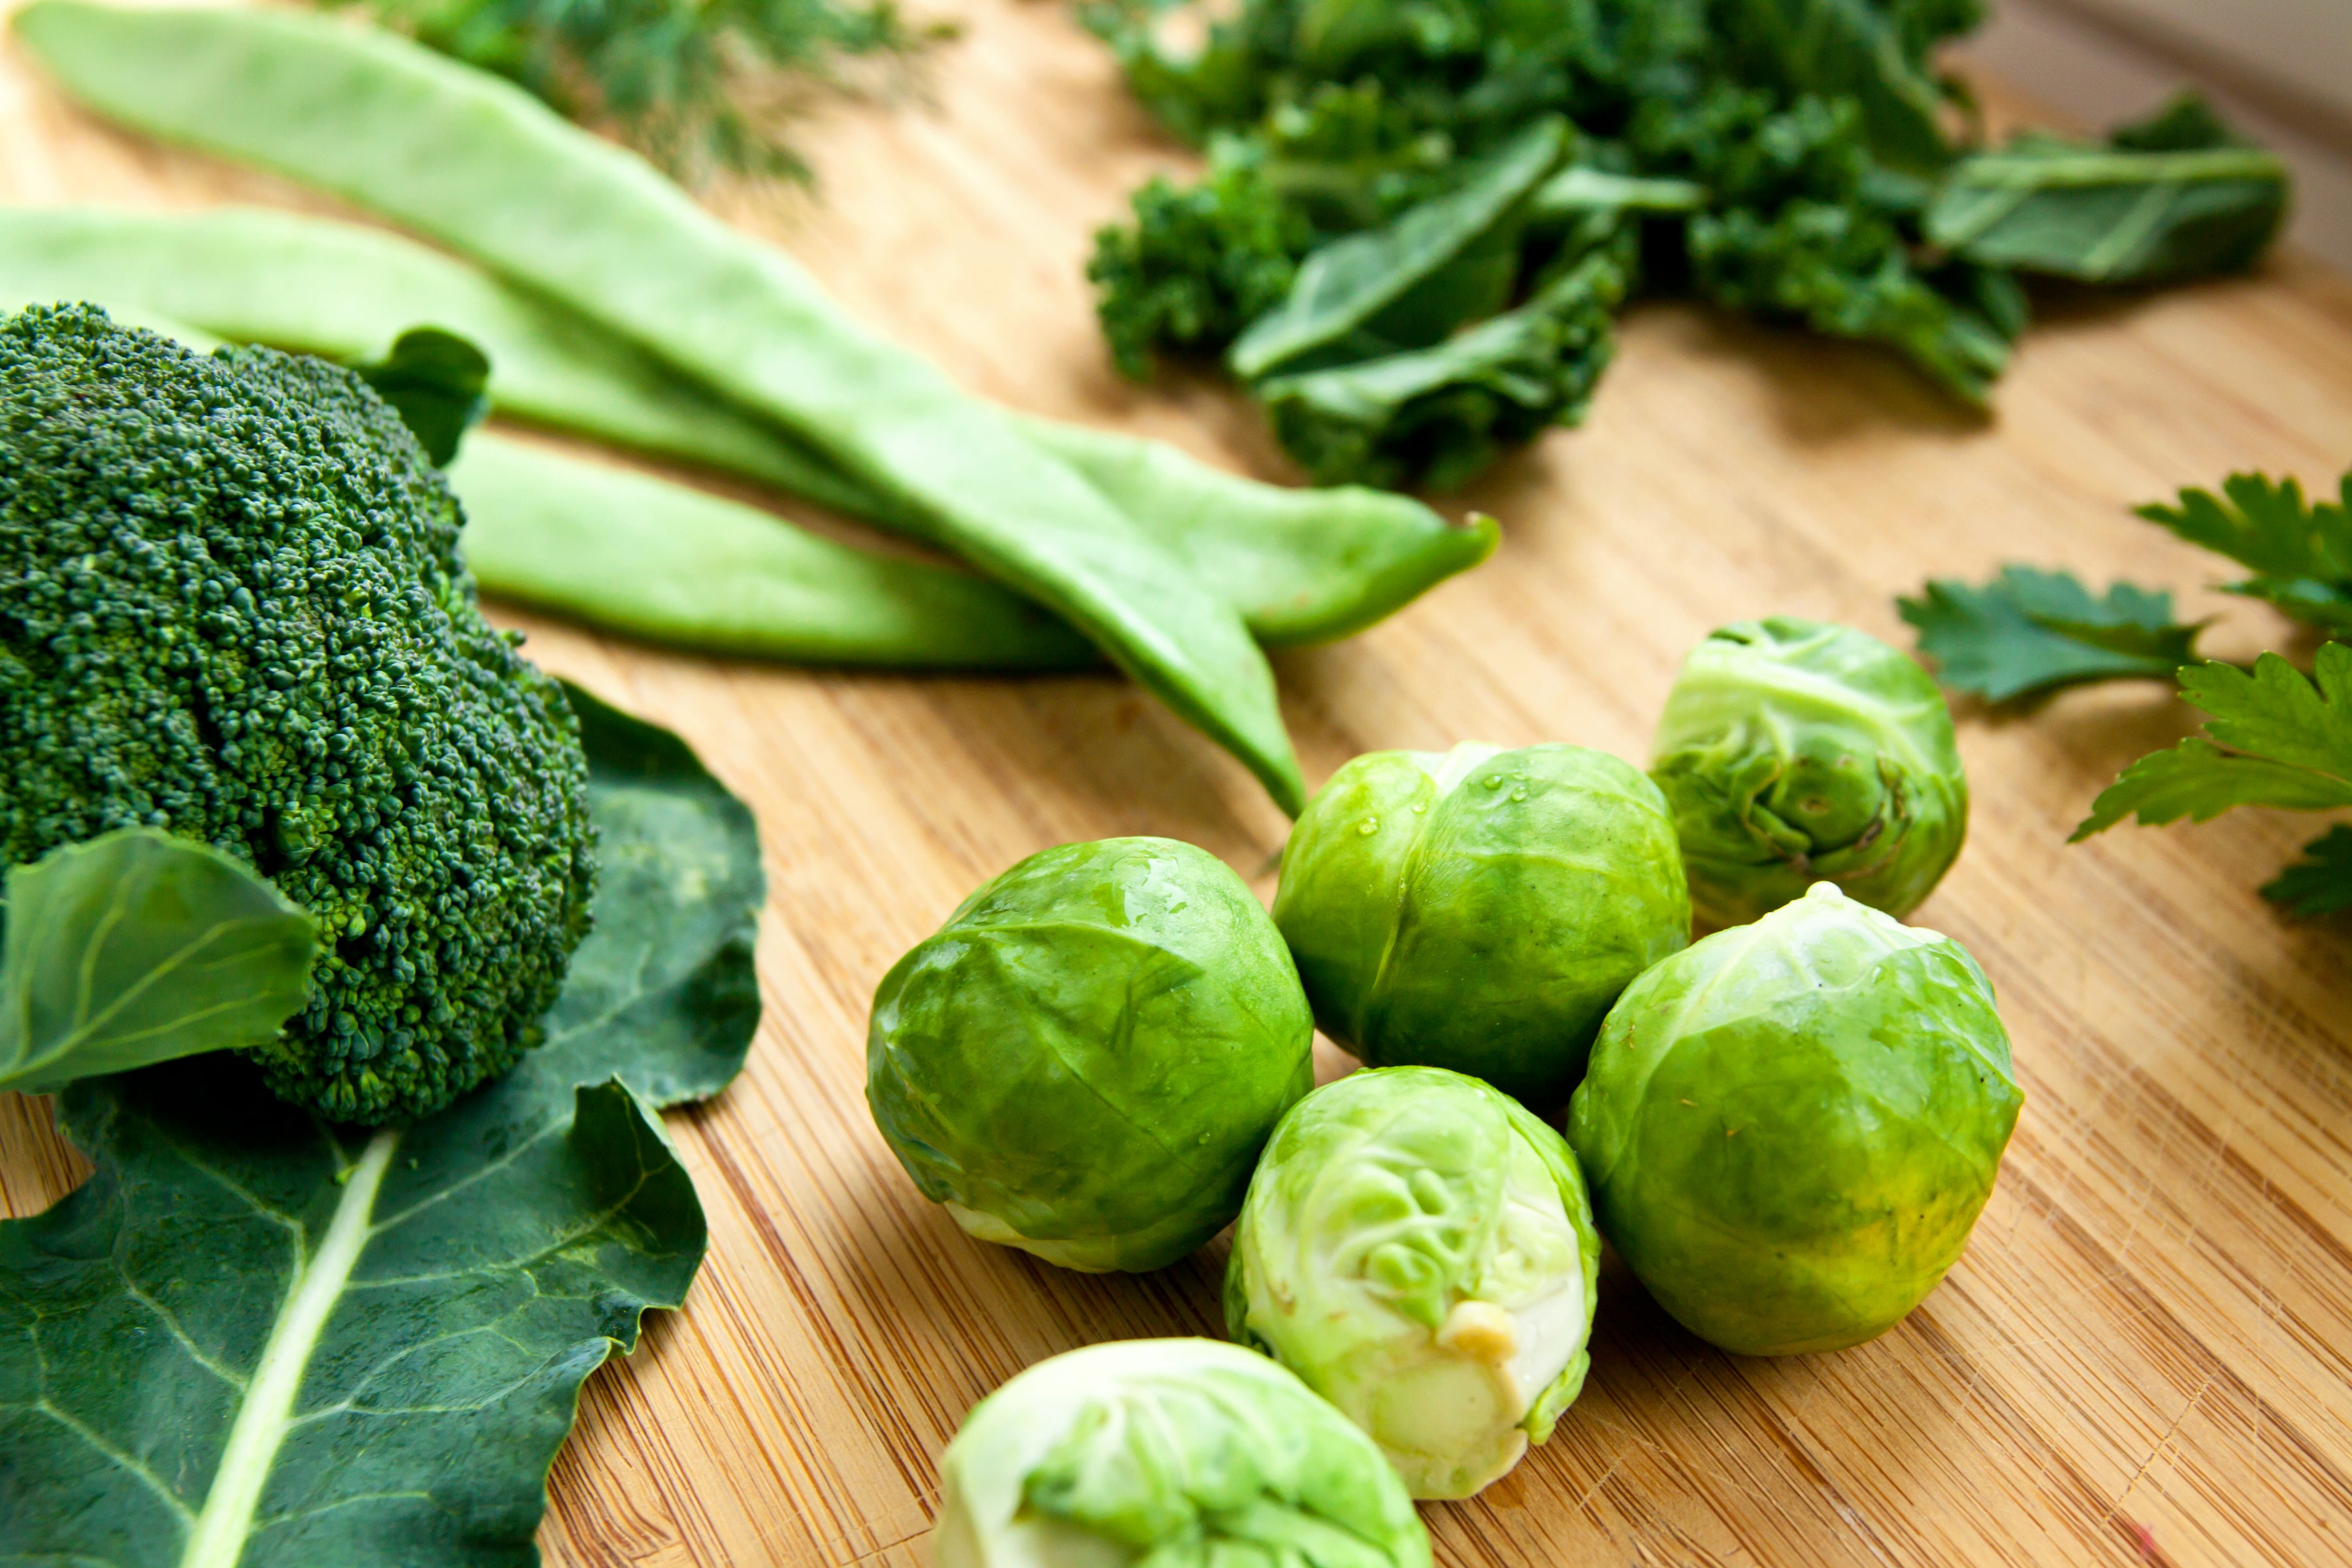 How Good Cooks Keep Green Veggies from Going Brown - Scientific American